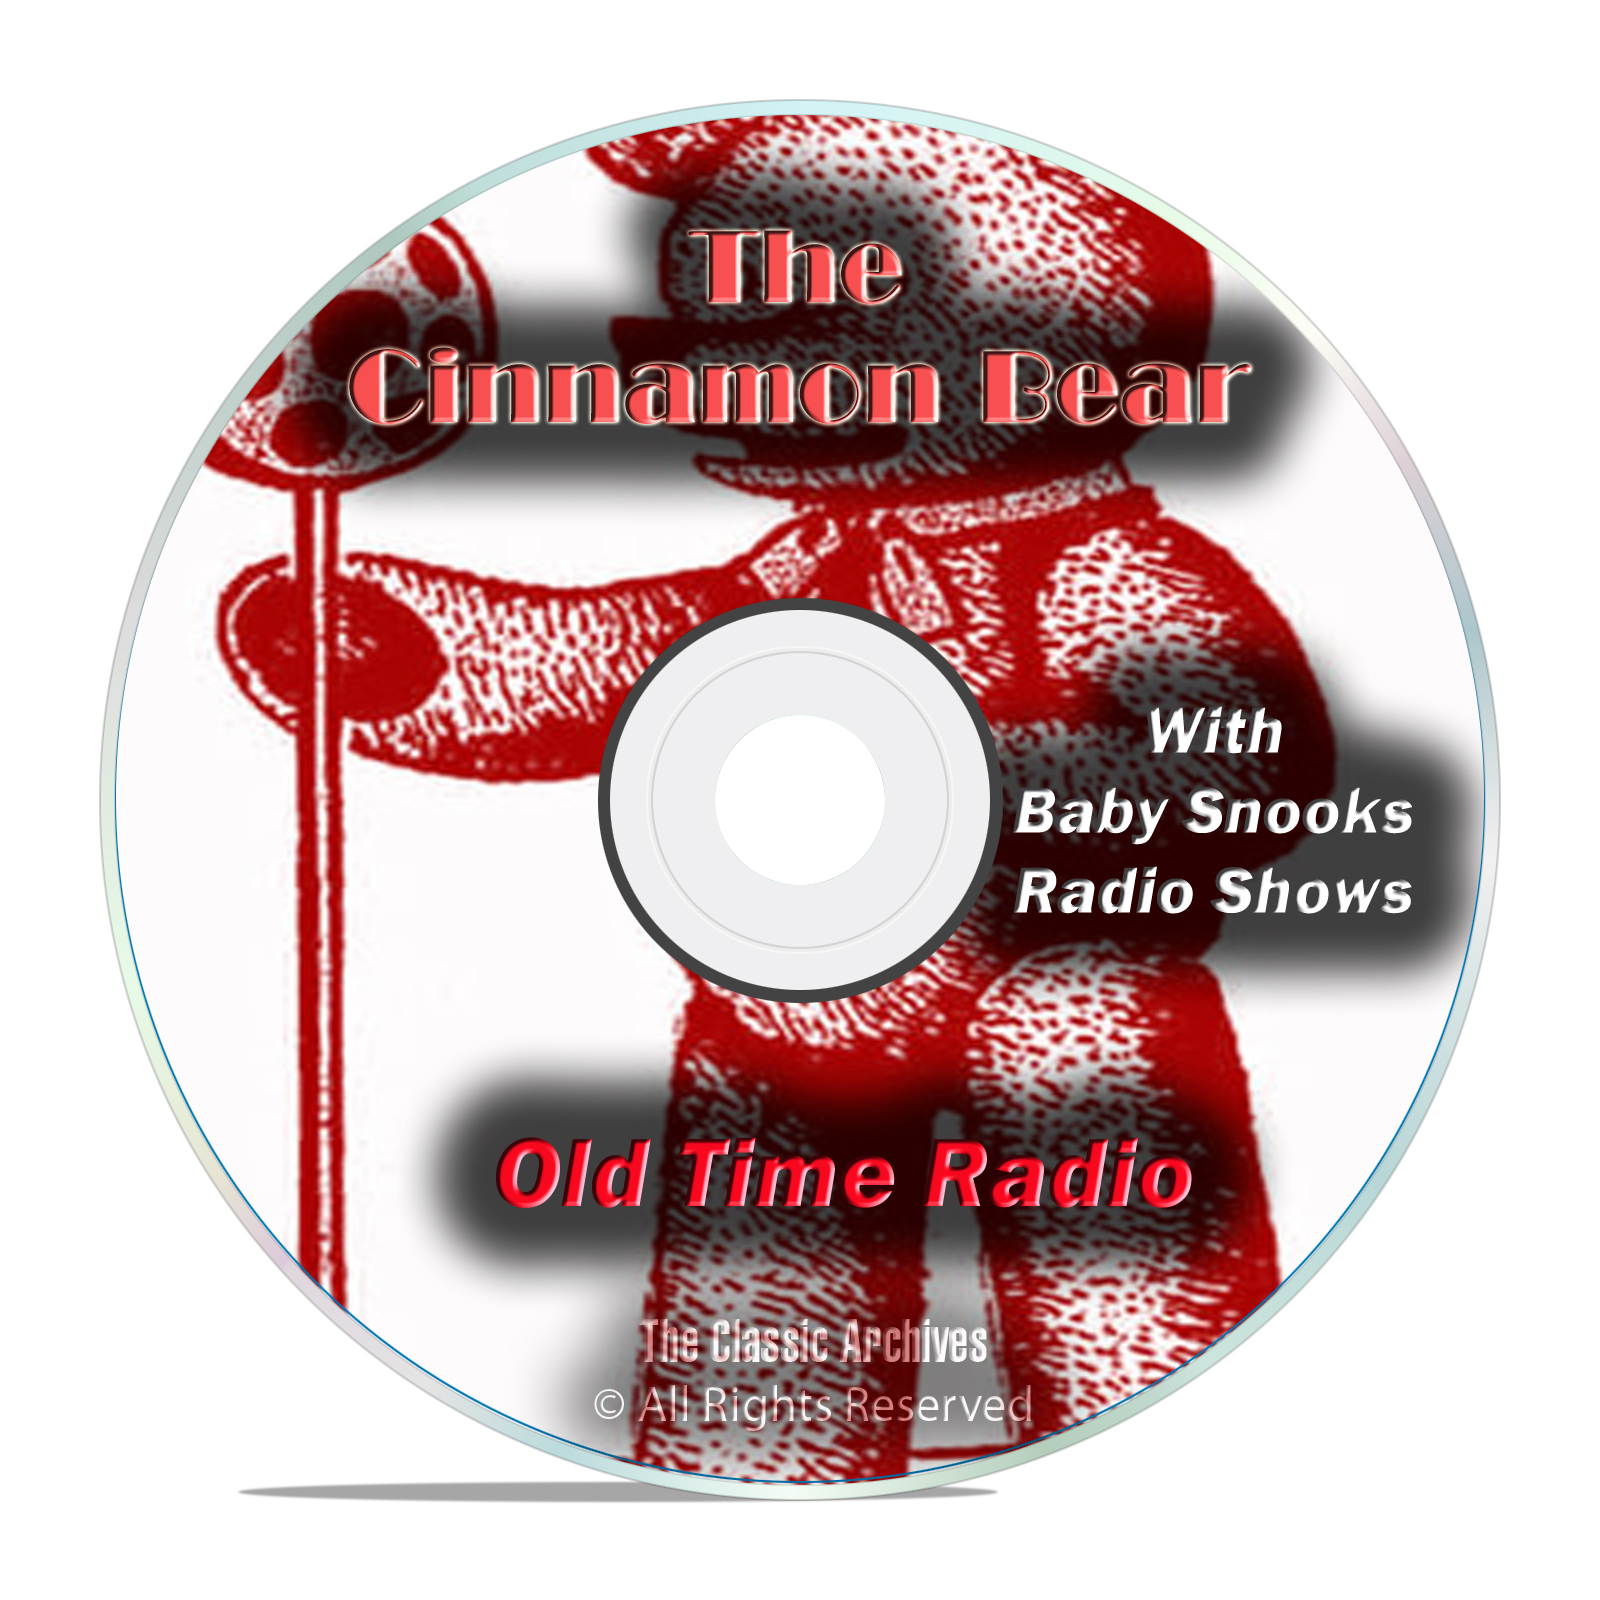 The Cinnamon Bear, 1,151 Old Time Radio Fiction Shows, OTR mp3 DVD - Click Image to Close